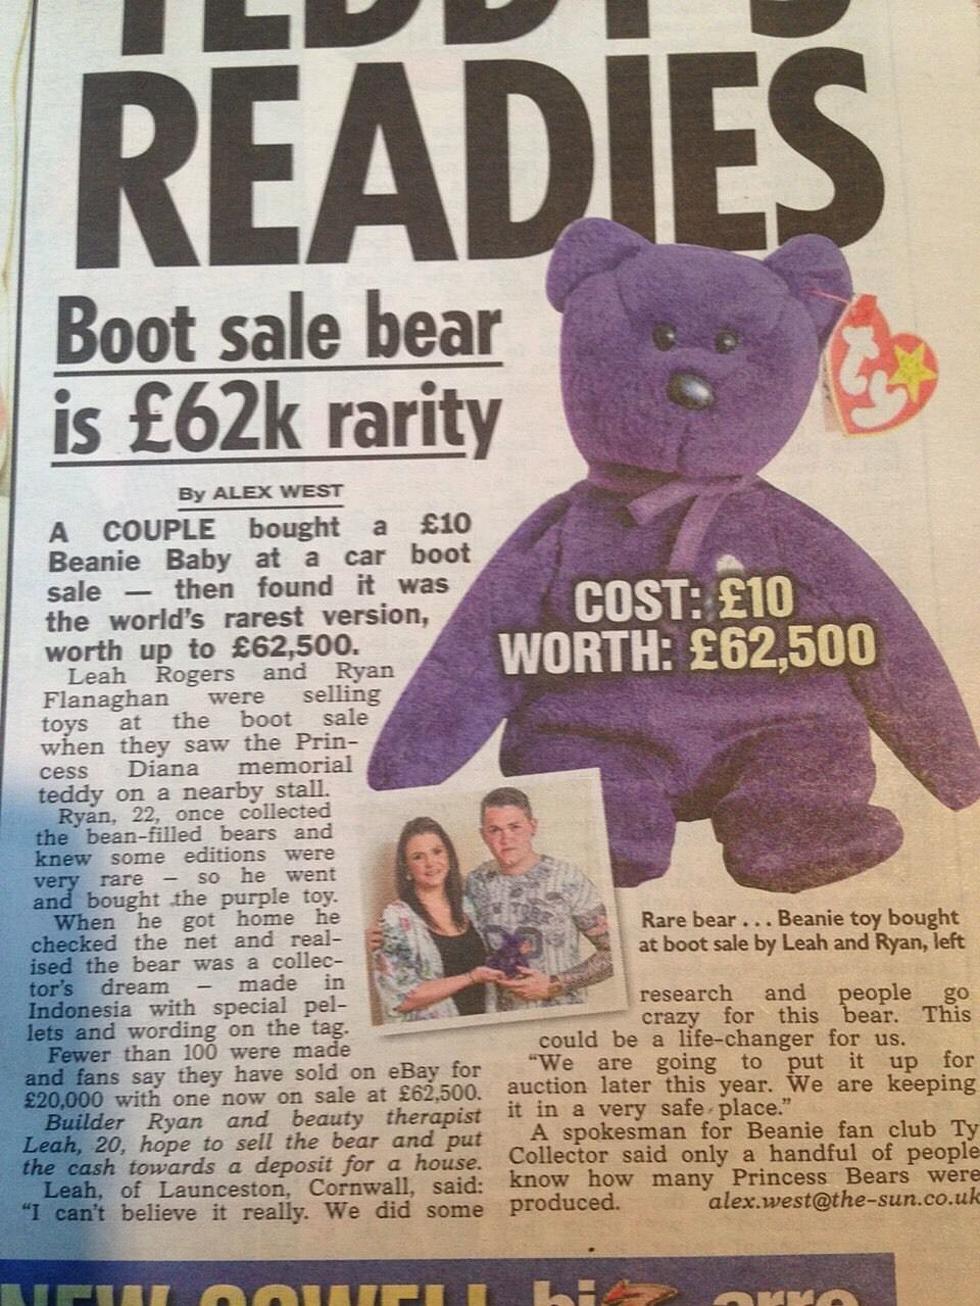 Couple Buys Beanie Baby for $15 at Garage Sale, It Could Be Worth $93K